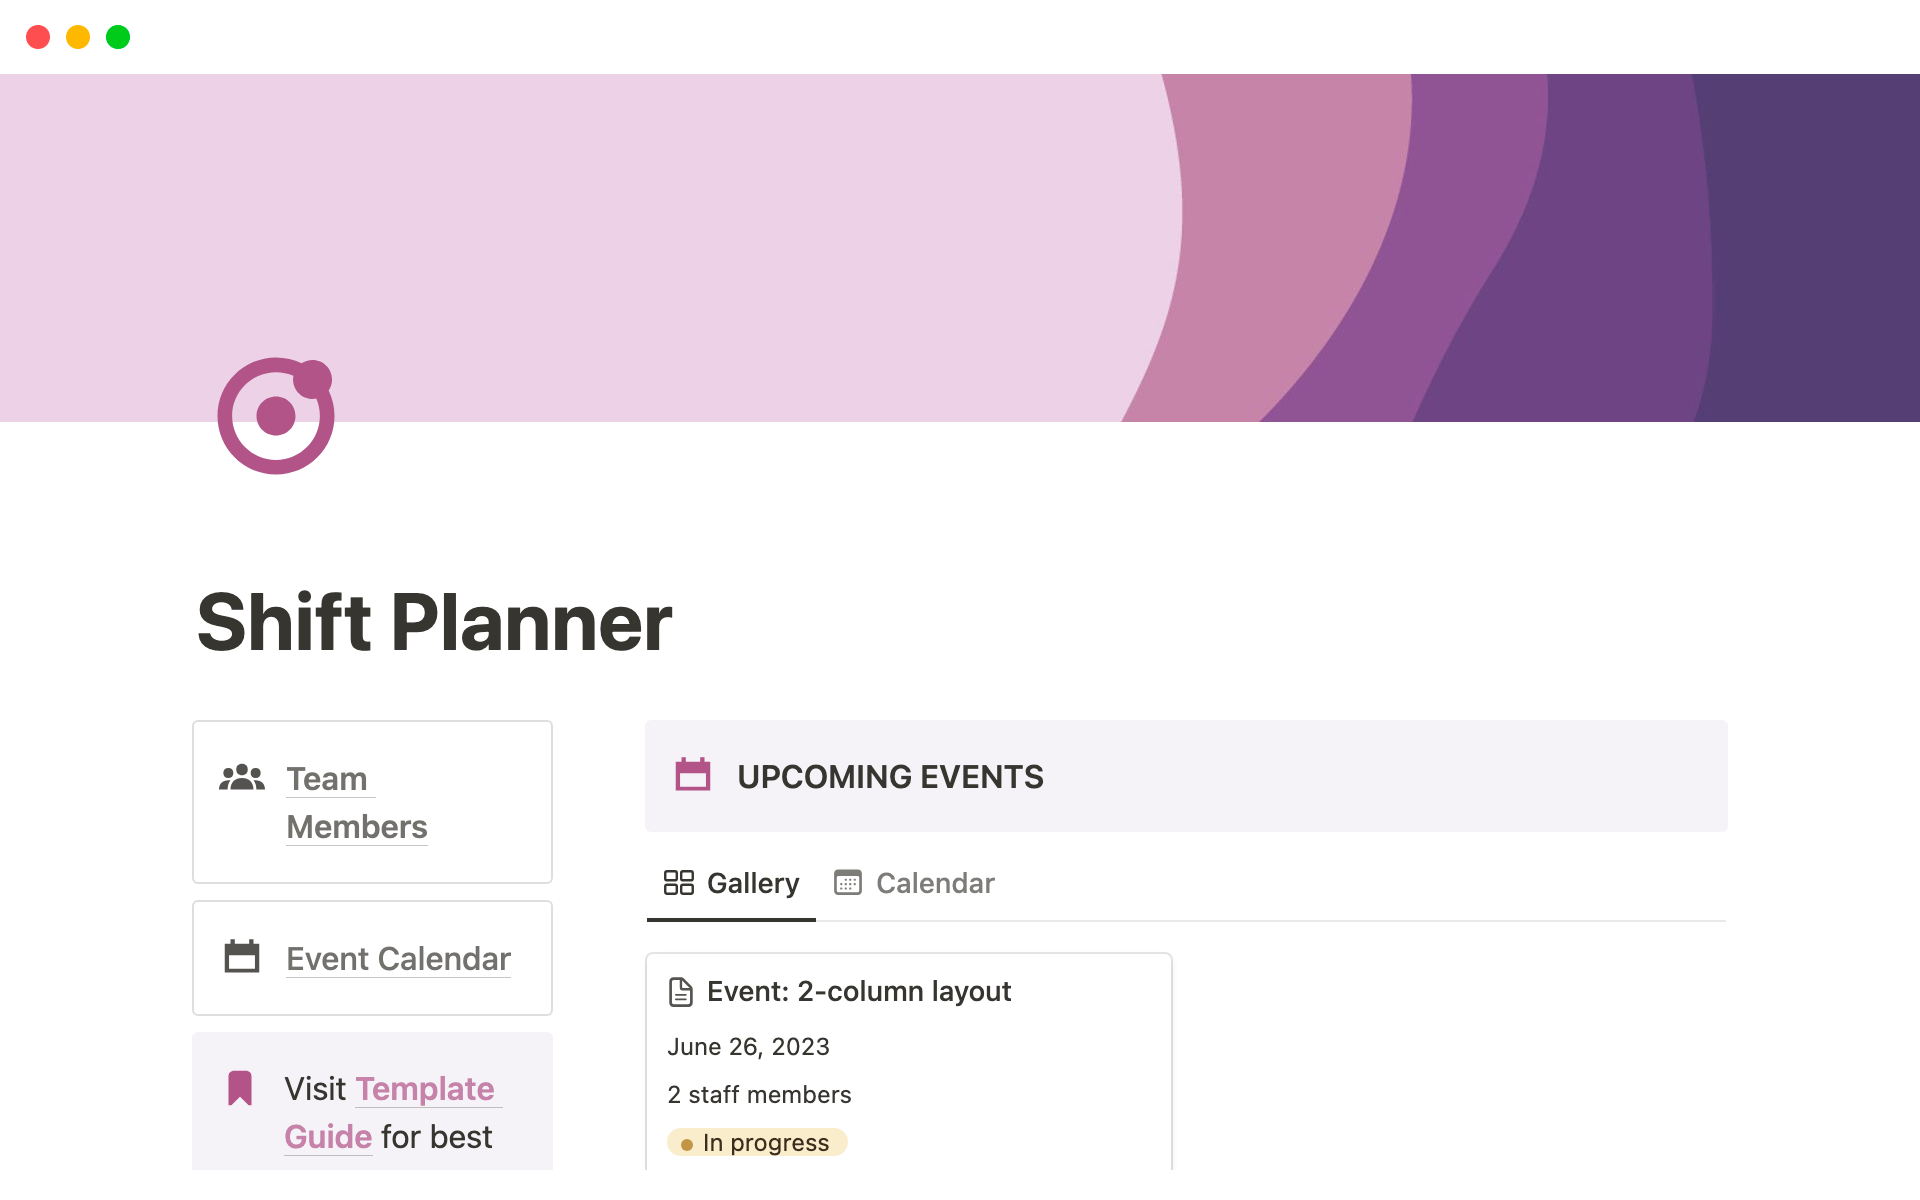 Shift Planner is designed to assign shifts to team members, track payments with a payment database, and auto-calculate payments based on recorded shifts.